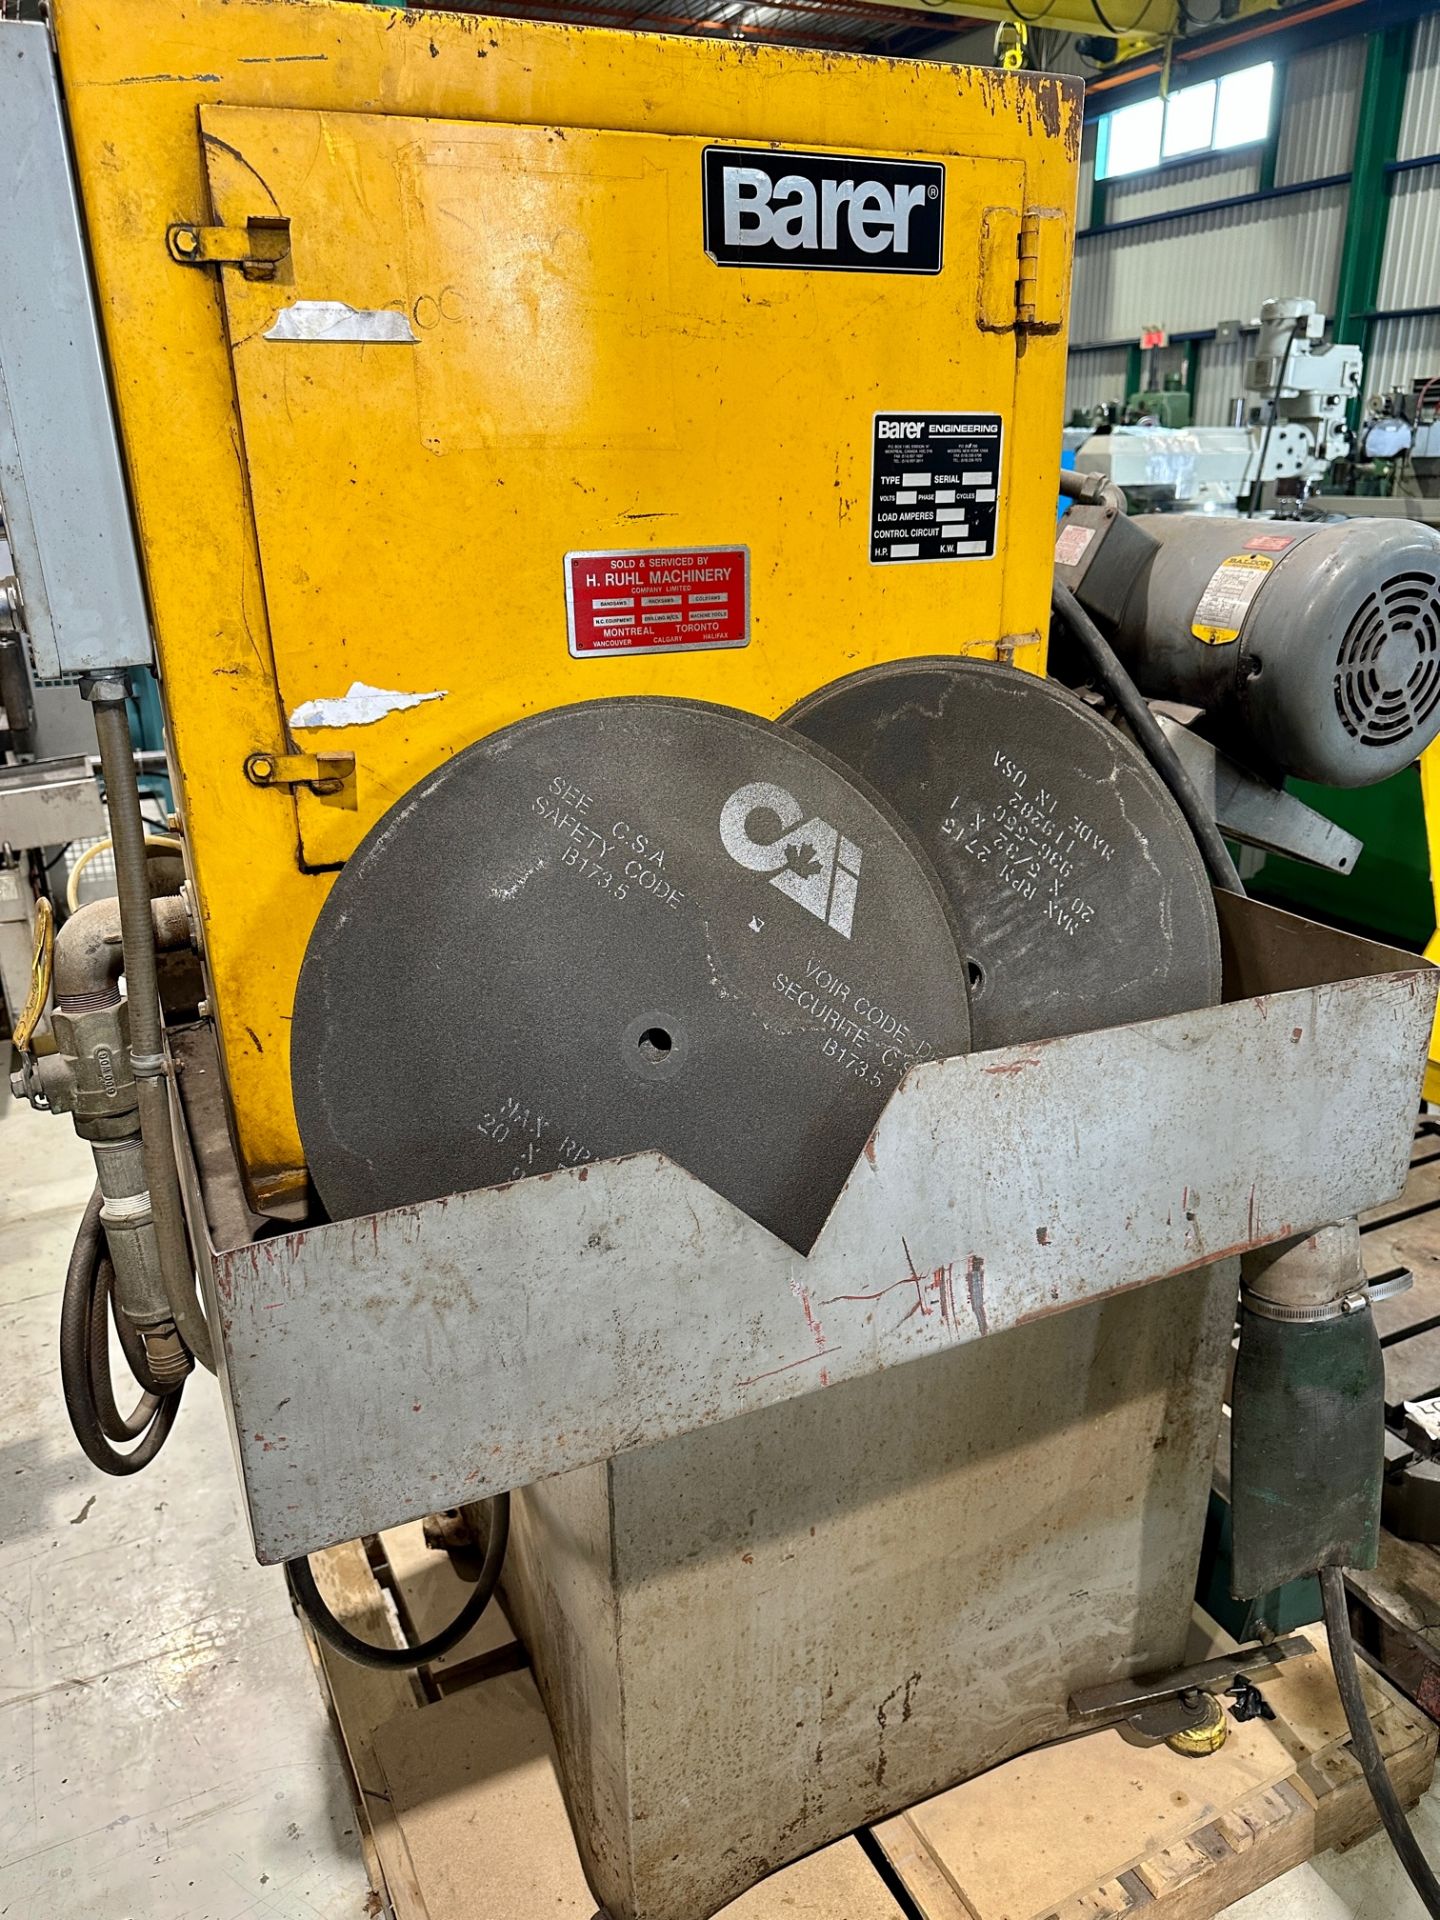 Everett Cold Shaft Saw / Model: 2022 / SN: 7353-5 / Capacity: 20" - Location, Montreal, Quebec - Image 3 of 6